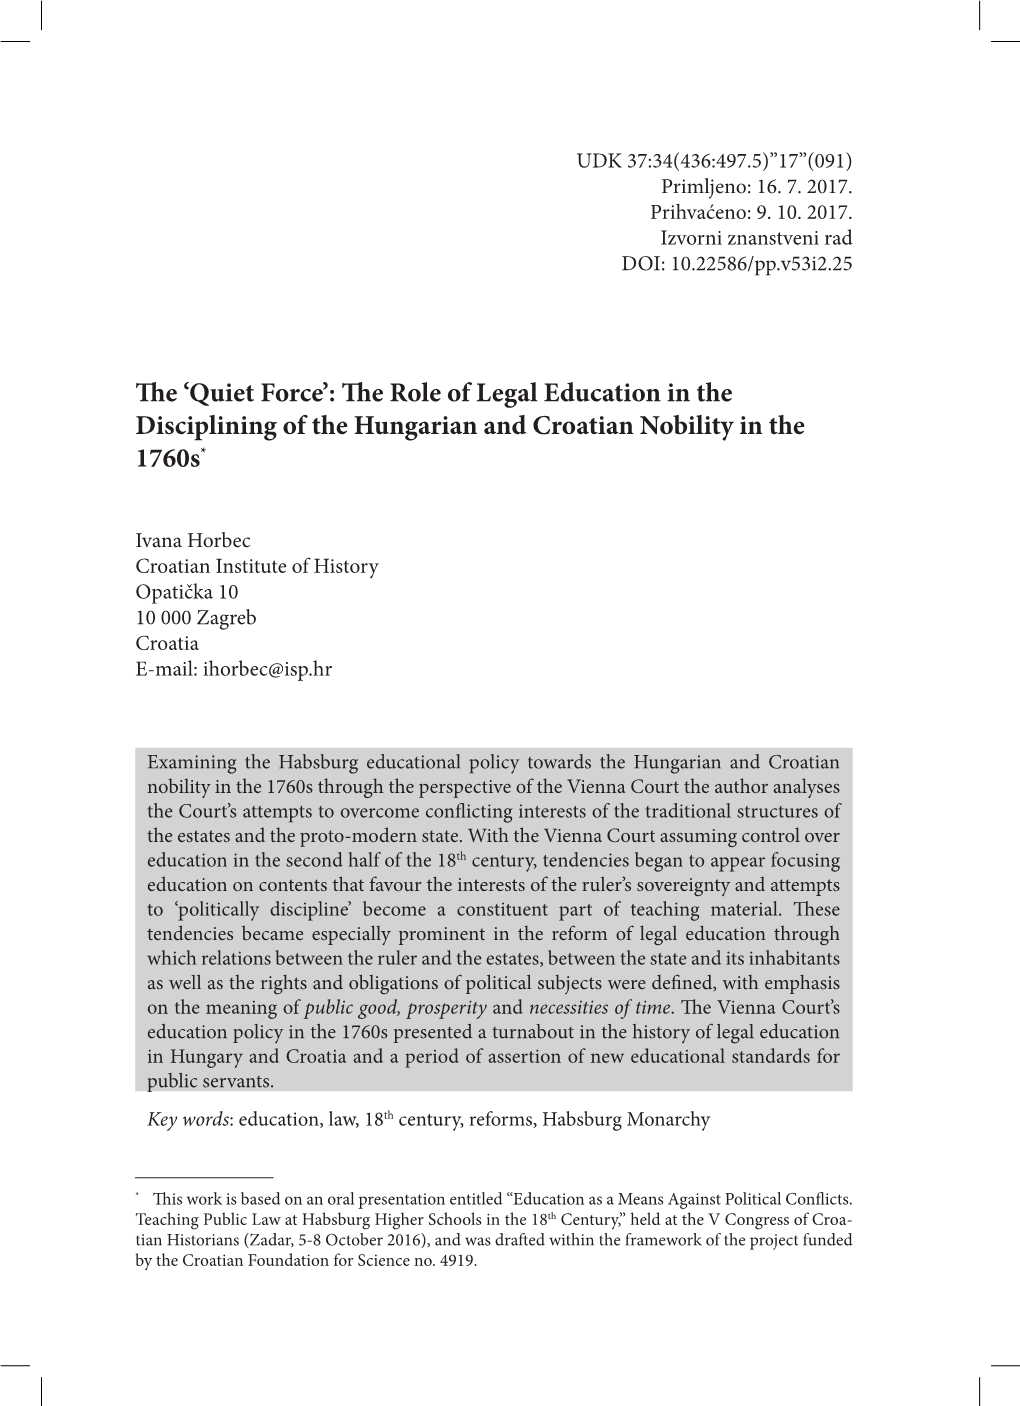 The 'Quiet Force': the Role of Legal Education in the Disciplining of the Hungarian and Croatian Nobility in the 1760S*